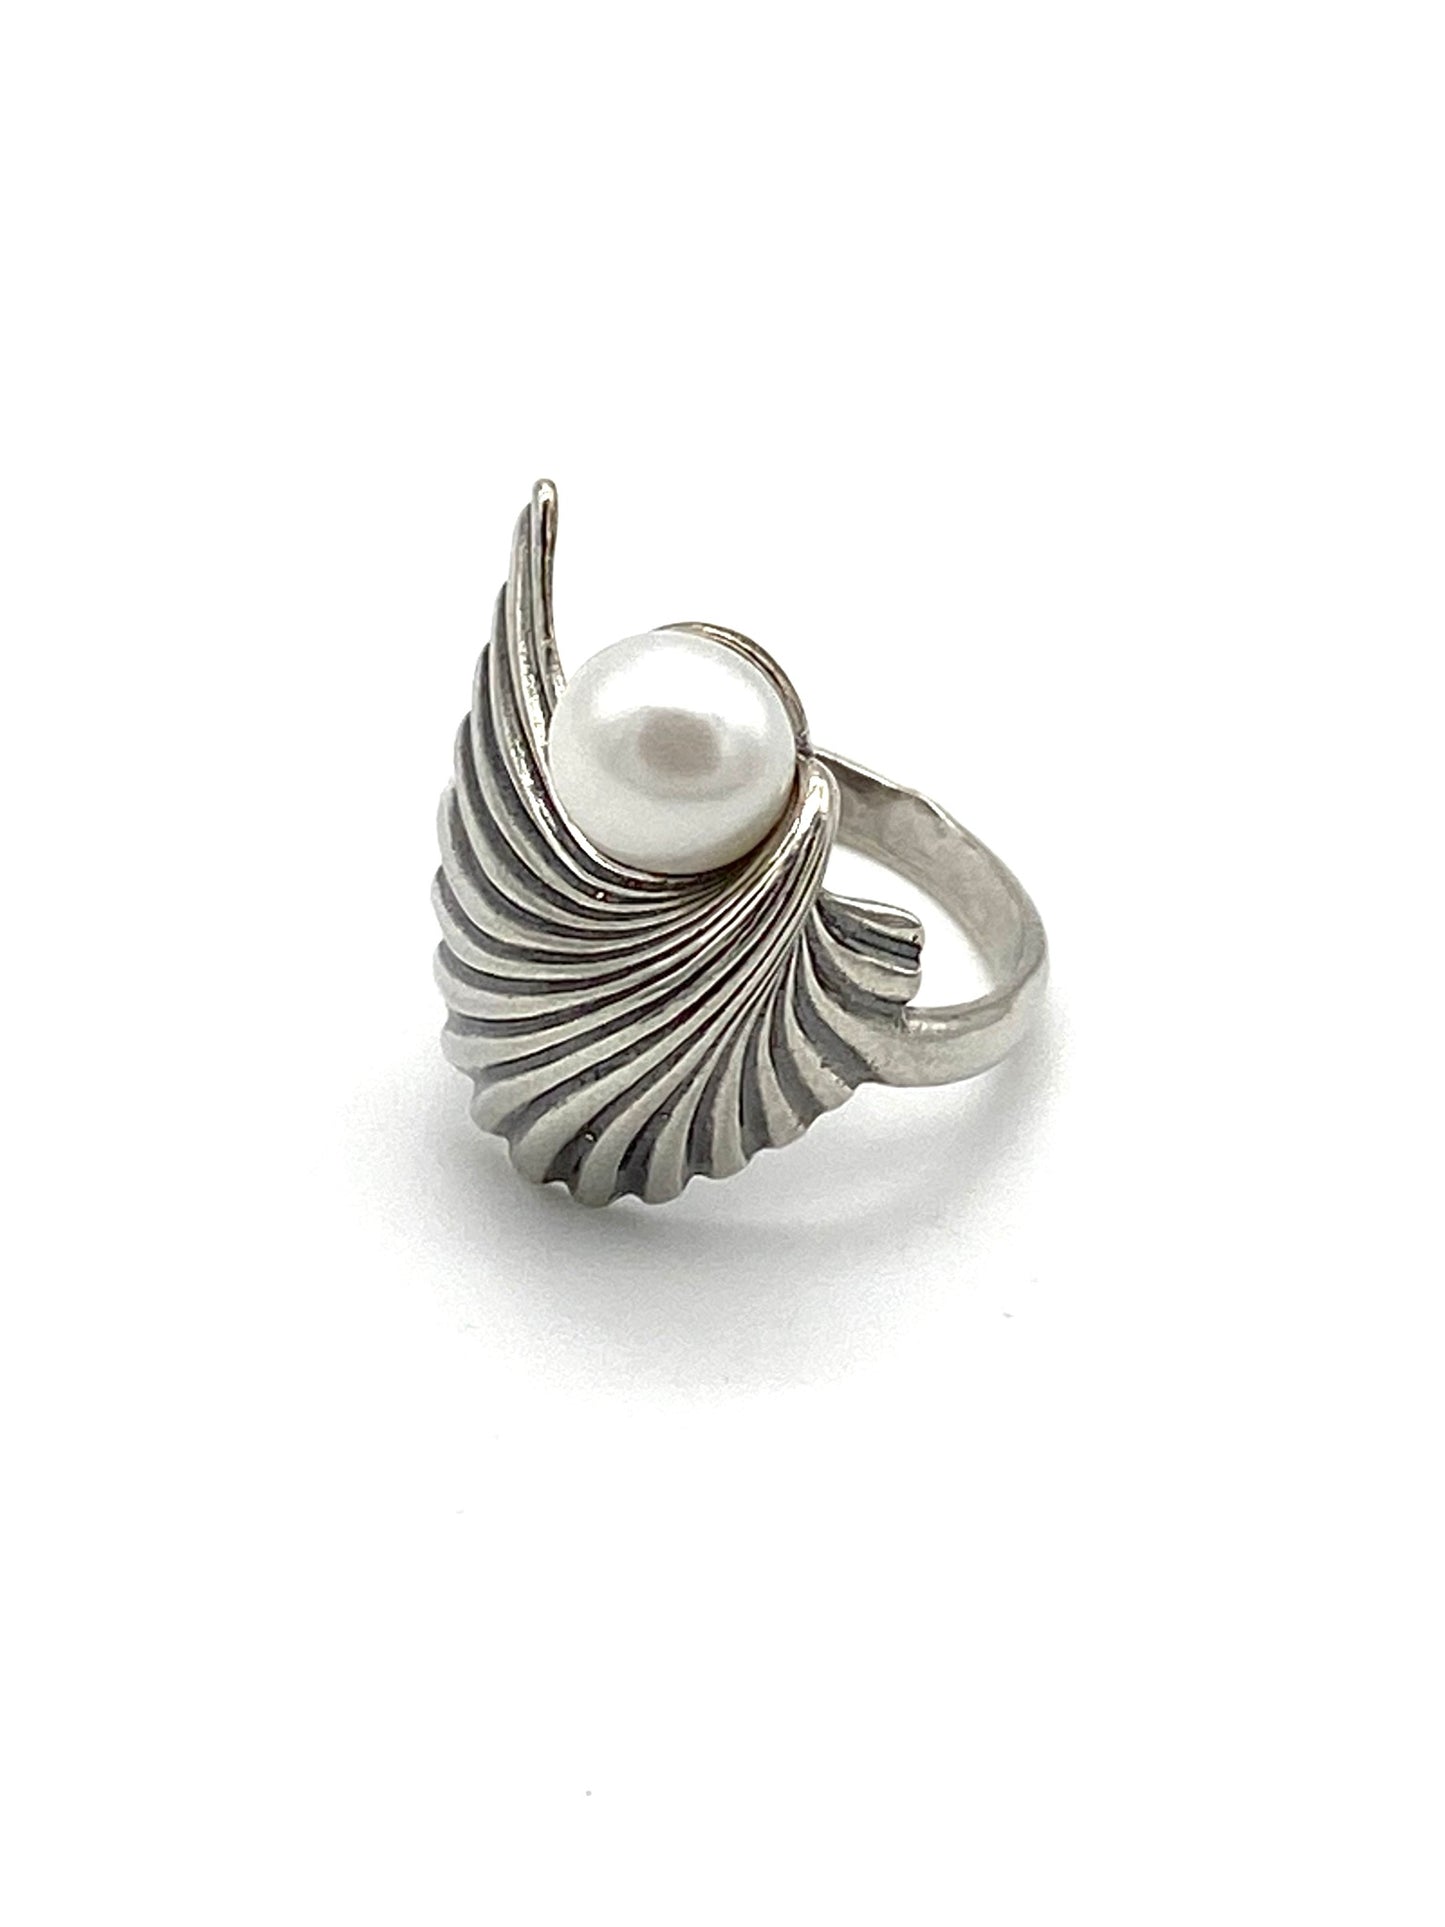 Mermaid Tail - Handcrafted Pearl Ring